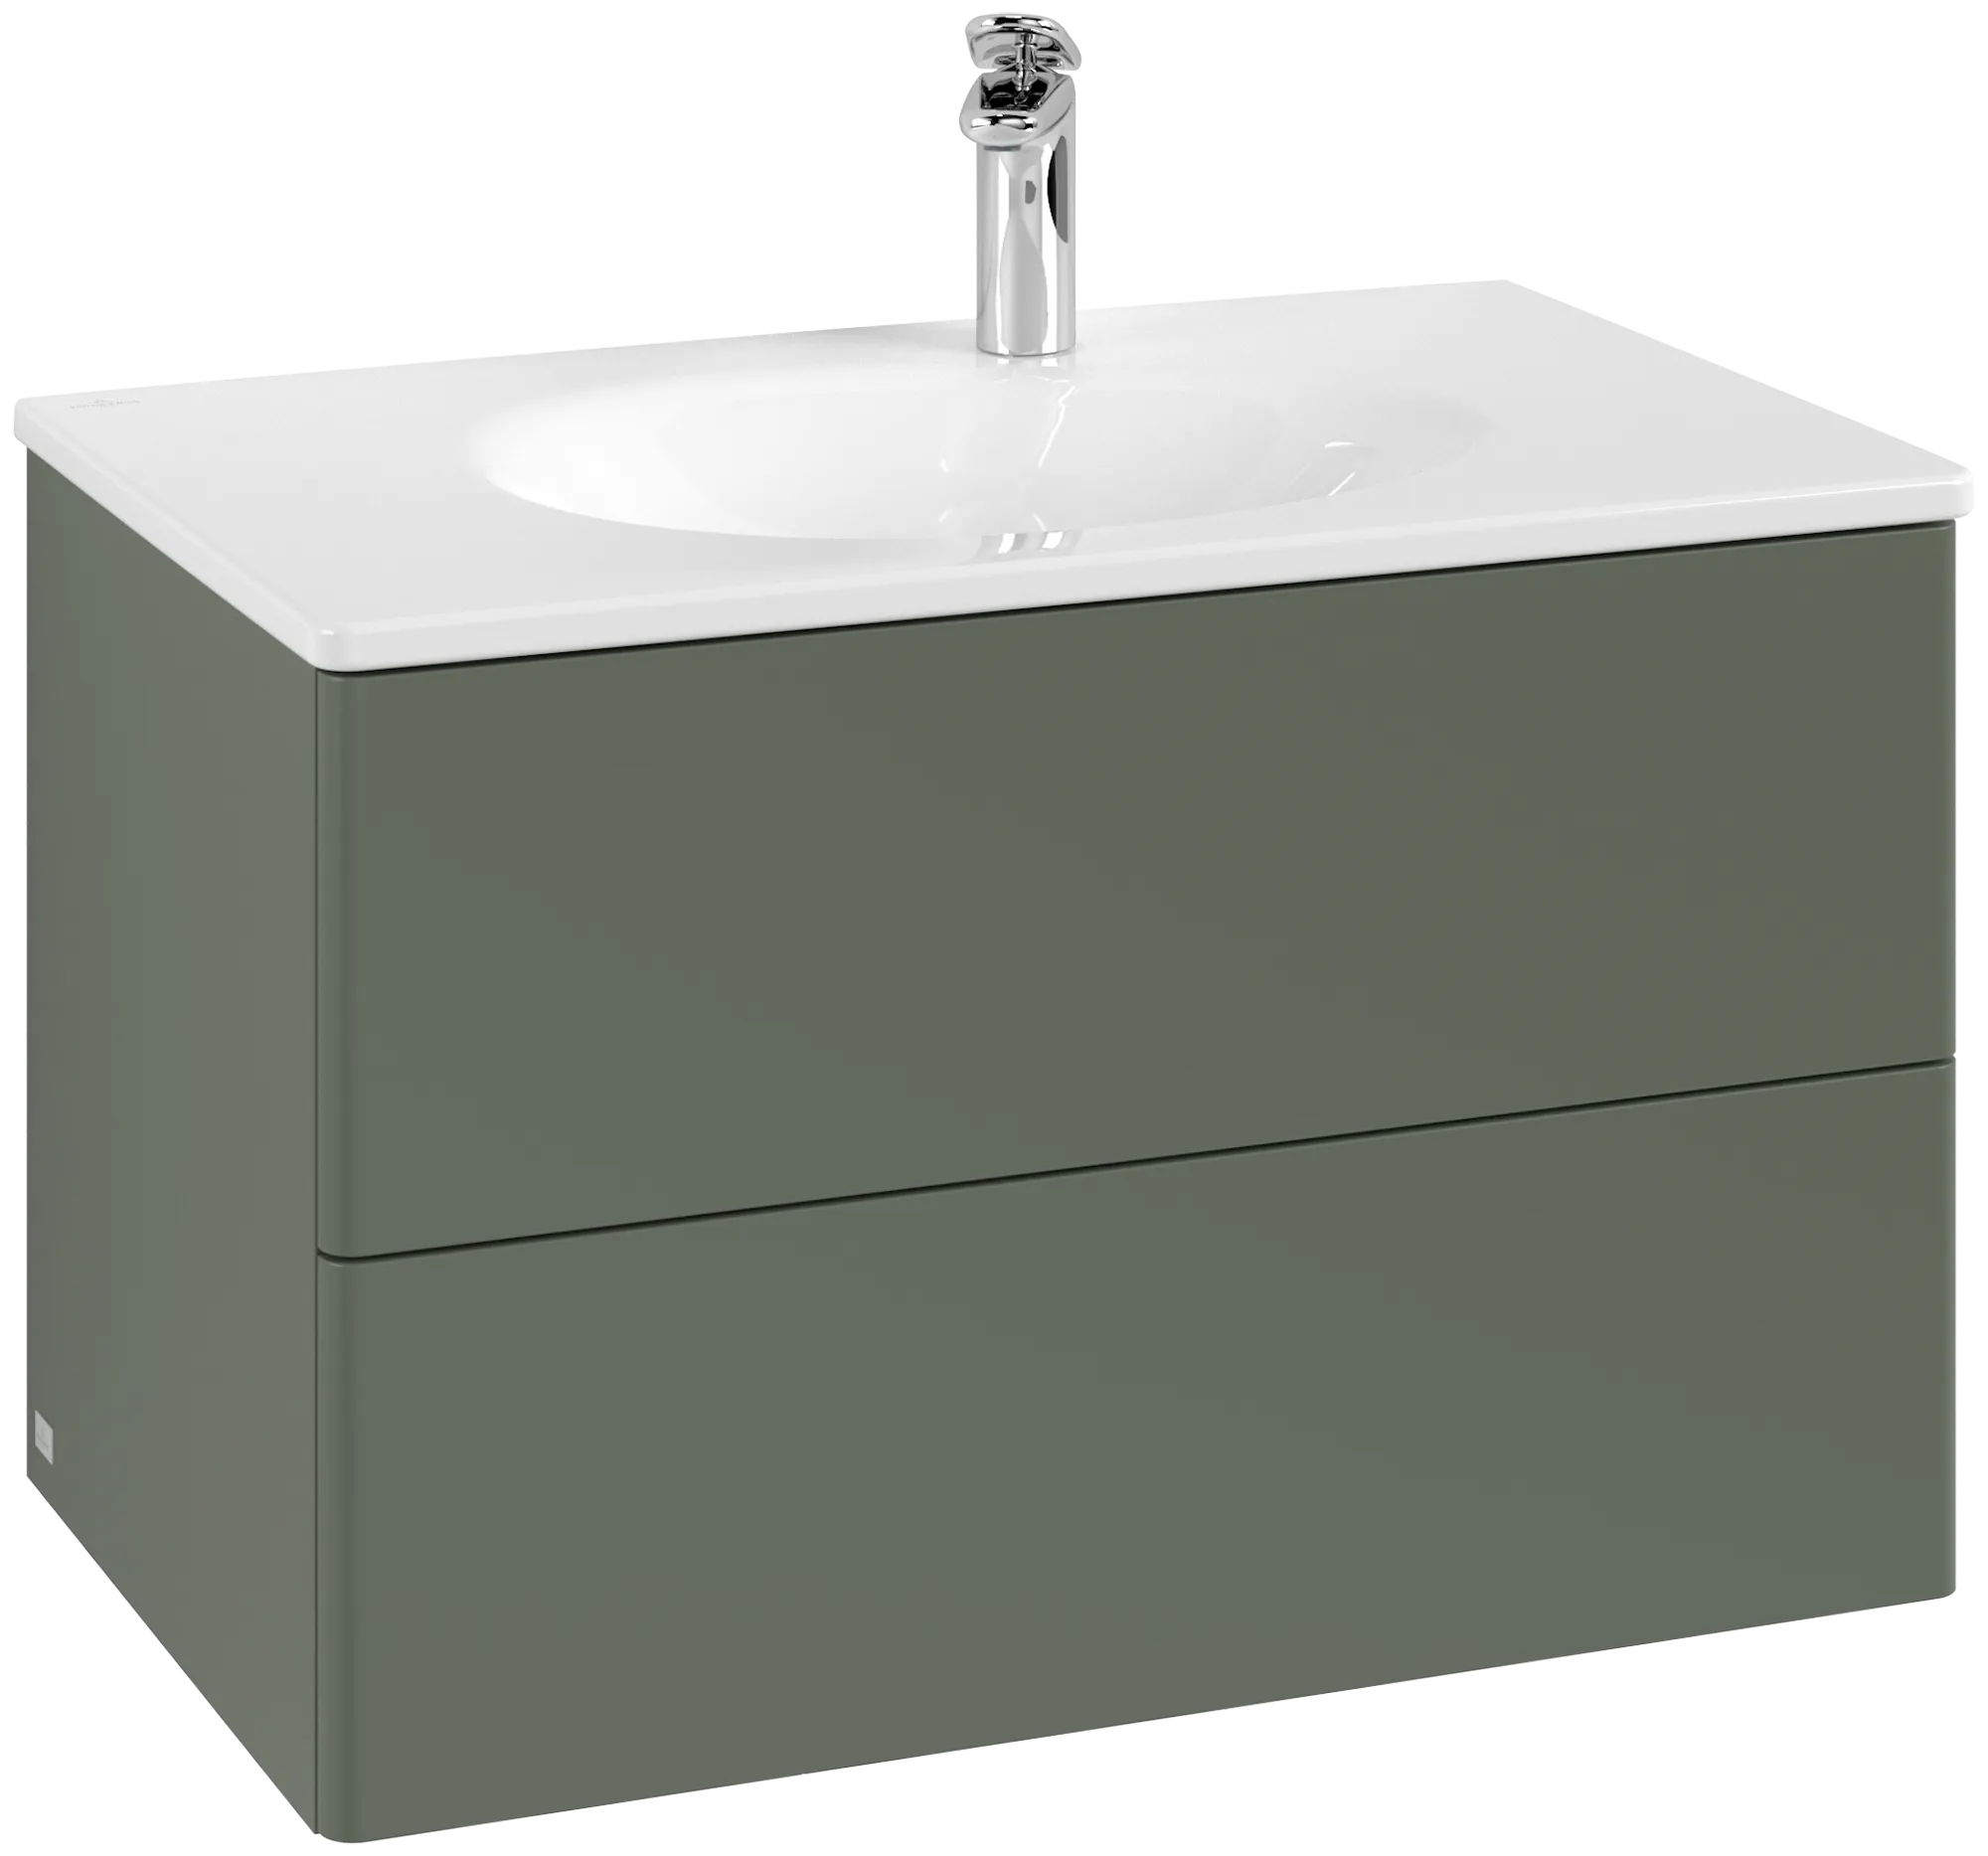 Picture of VILLEROY BOCH Antao Vanity unit, with lighting, 2 pull-out compartments, 788 x 504 x 496 mm, Front without structure, Leaf Green Matt Lacquer #L04000HL